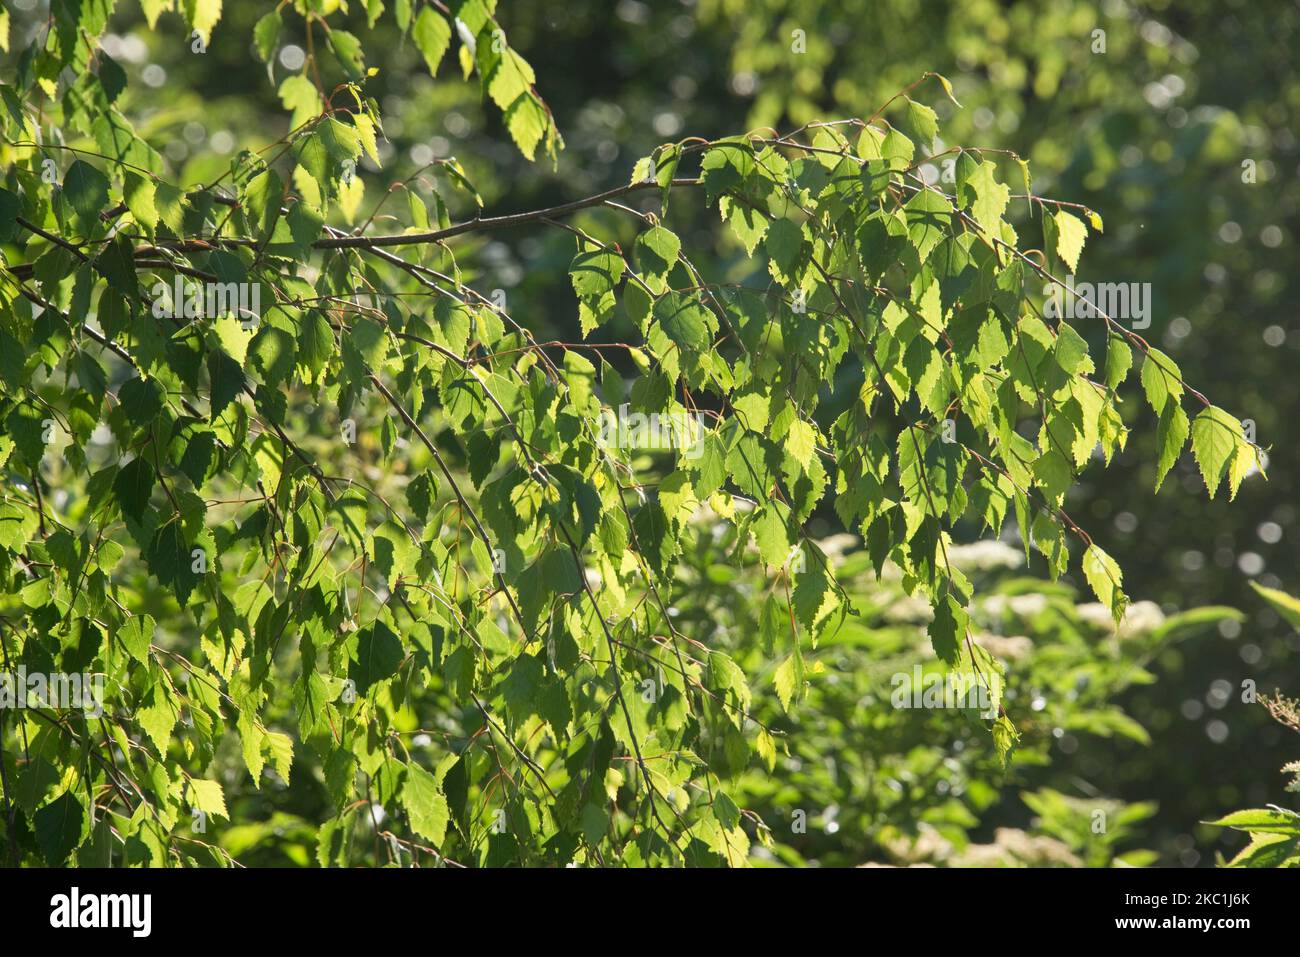 Sunlight through back lit young triangular leaves of silver birch (Betula pendula) on a deciduous woodland tree in early summer, Berkshire, June Stock Photo